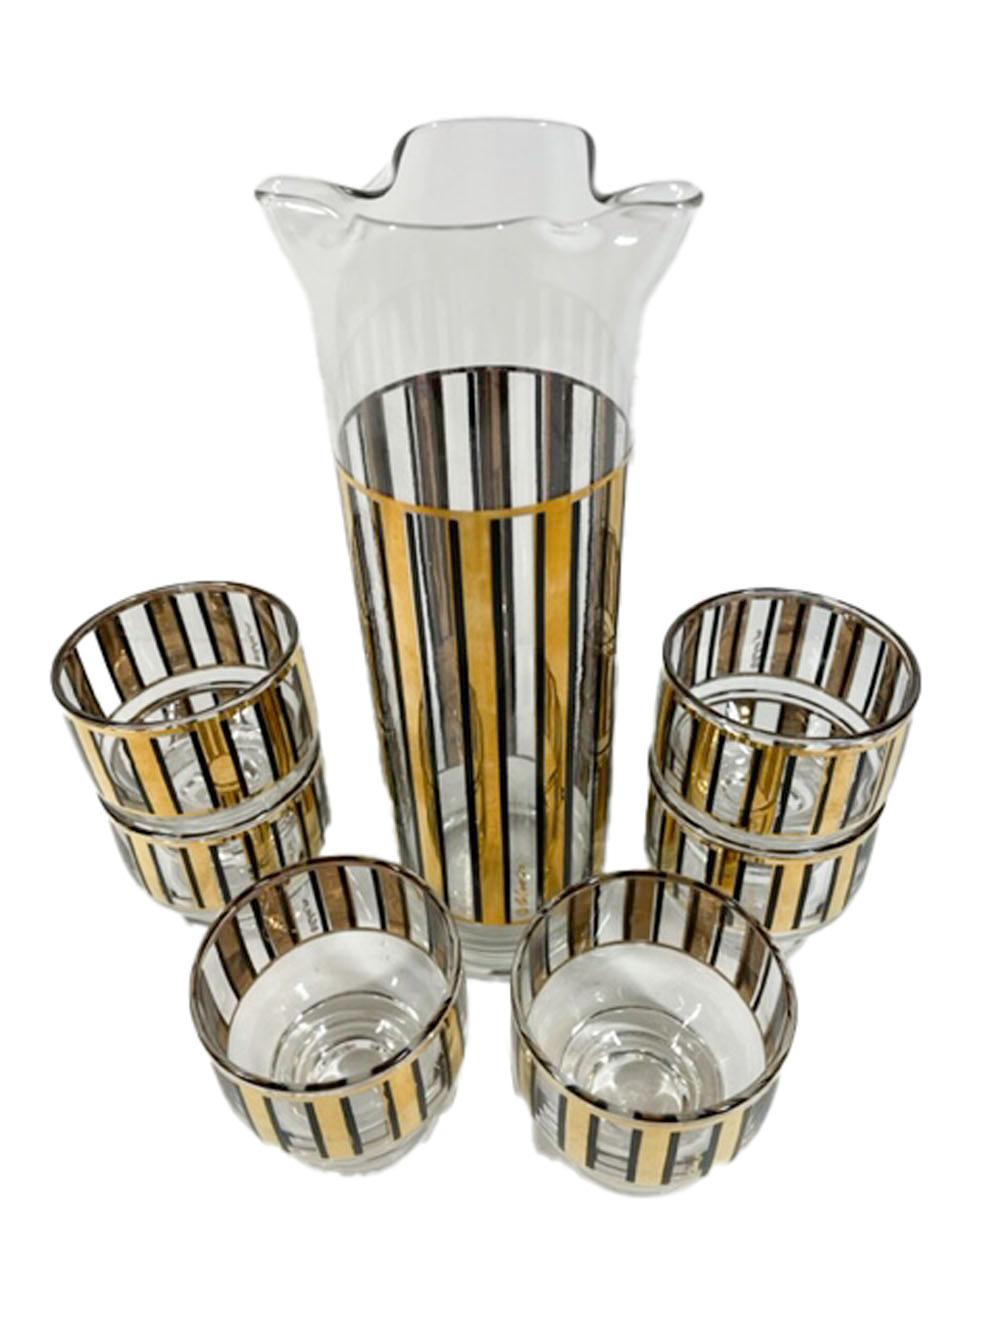 Mid-Century Modern cocktail set by Culver, LTD in the Bandbox pattern. Cocktail pitcher and 6 footed stackable cocktail glasses decorated with 22k gold vertical bars each with a black enamel line along each side.